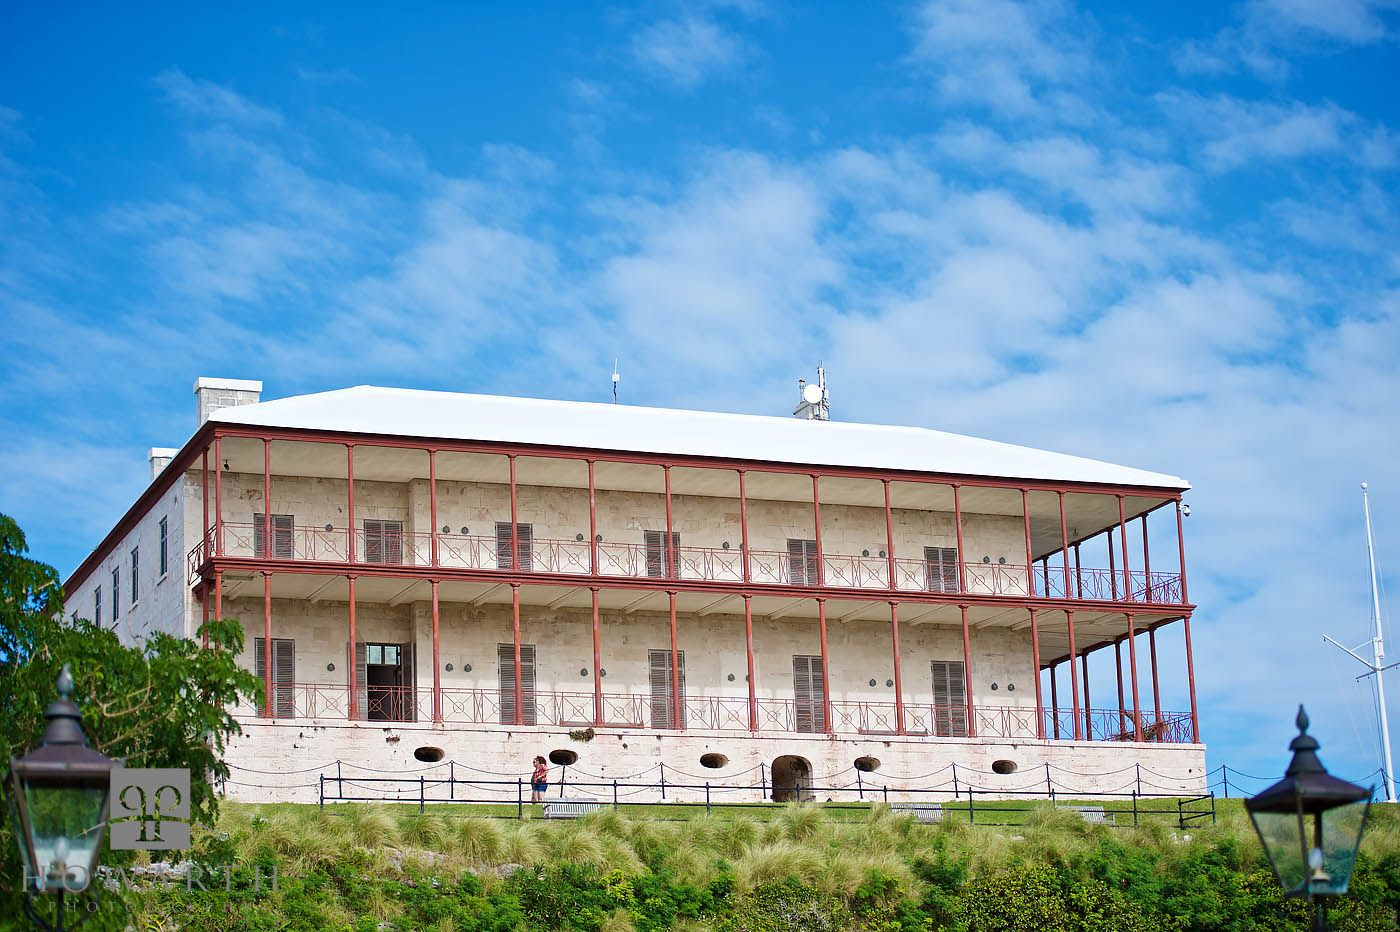 Facing the Commissioner's House. The Bermuda Maritime Museum is located in The Royal Dockyard on Ireland Island.